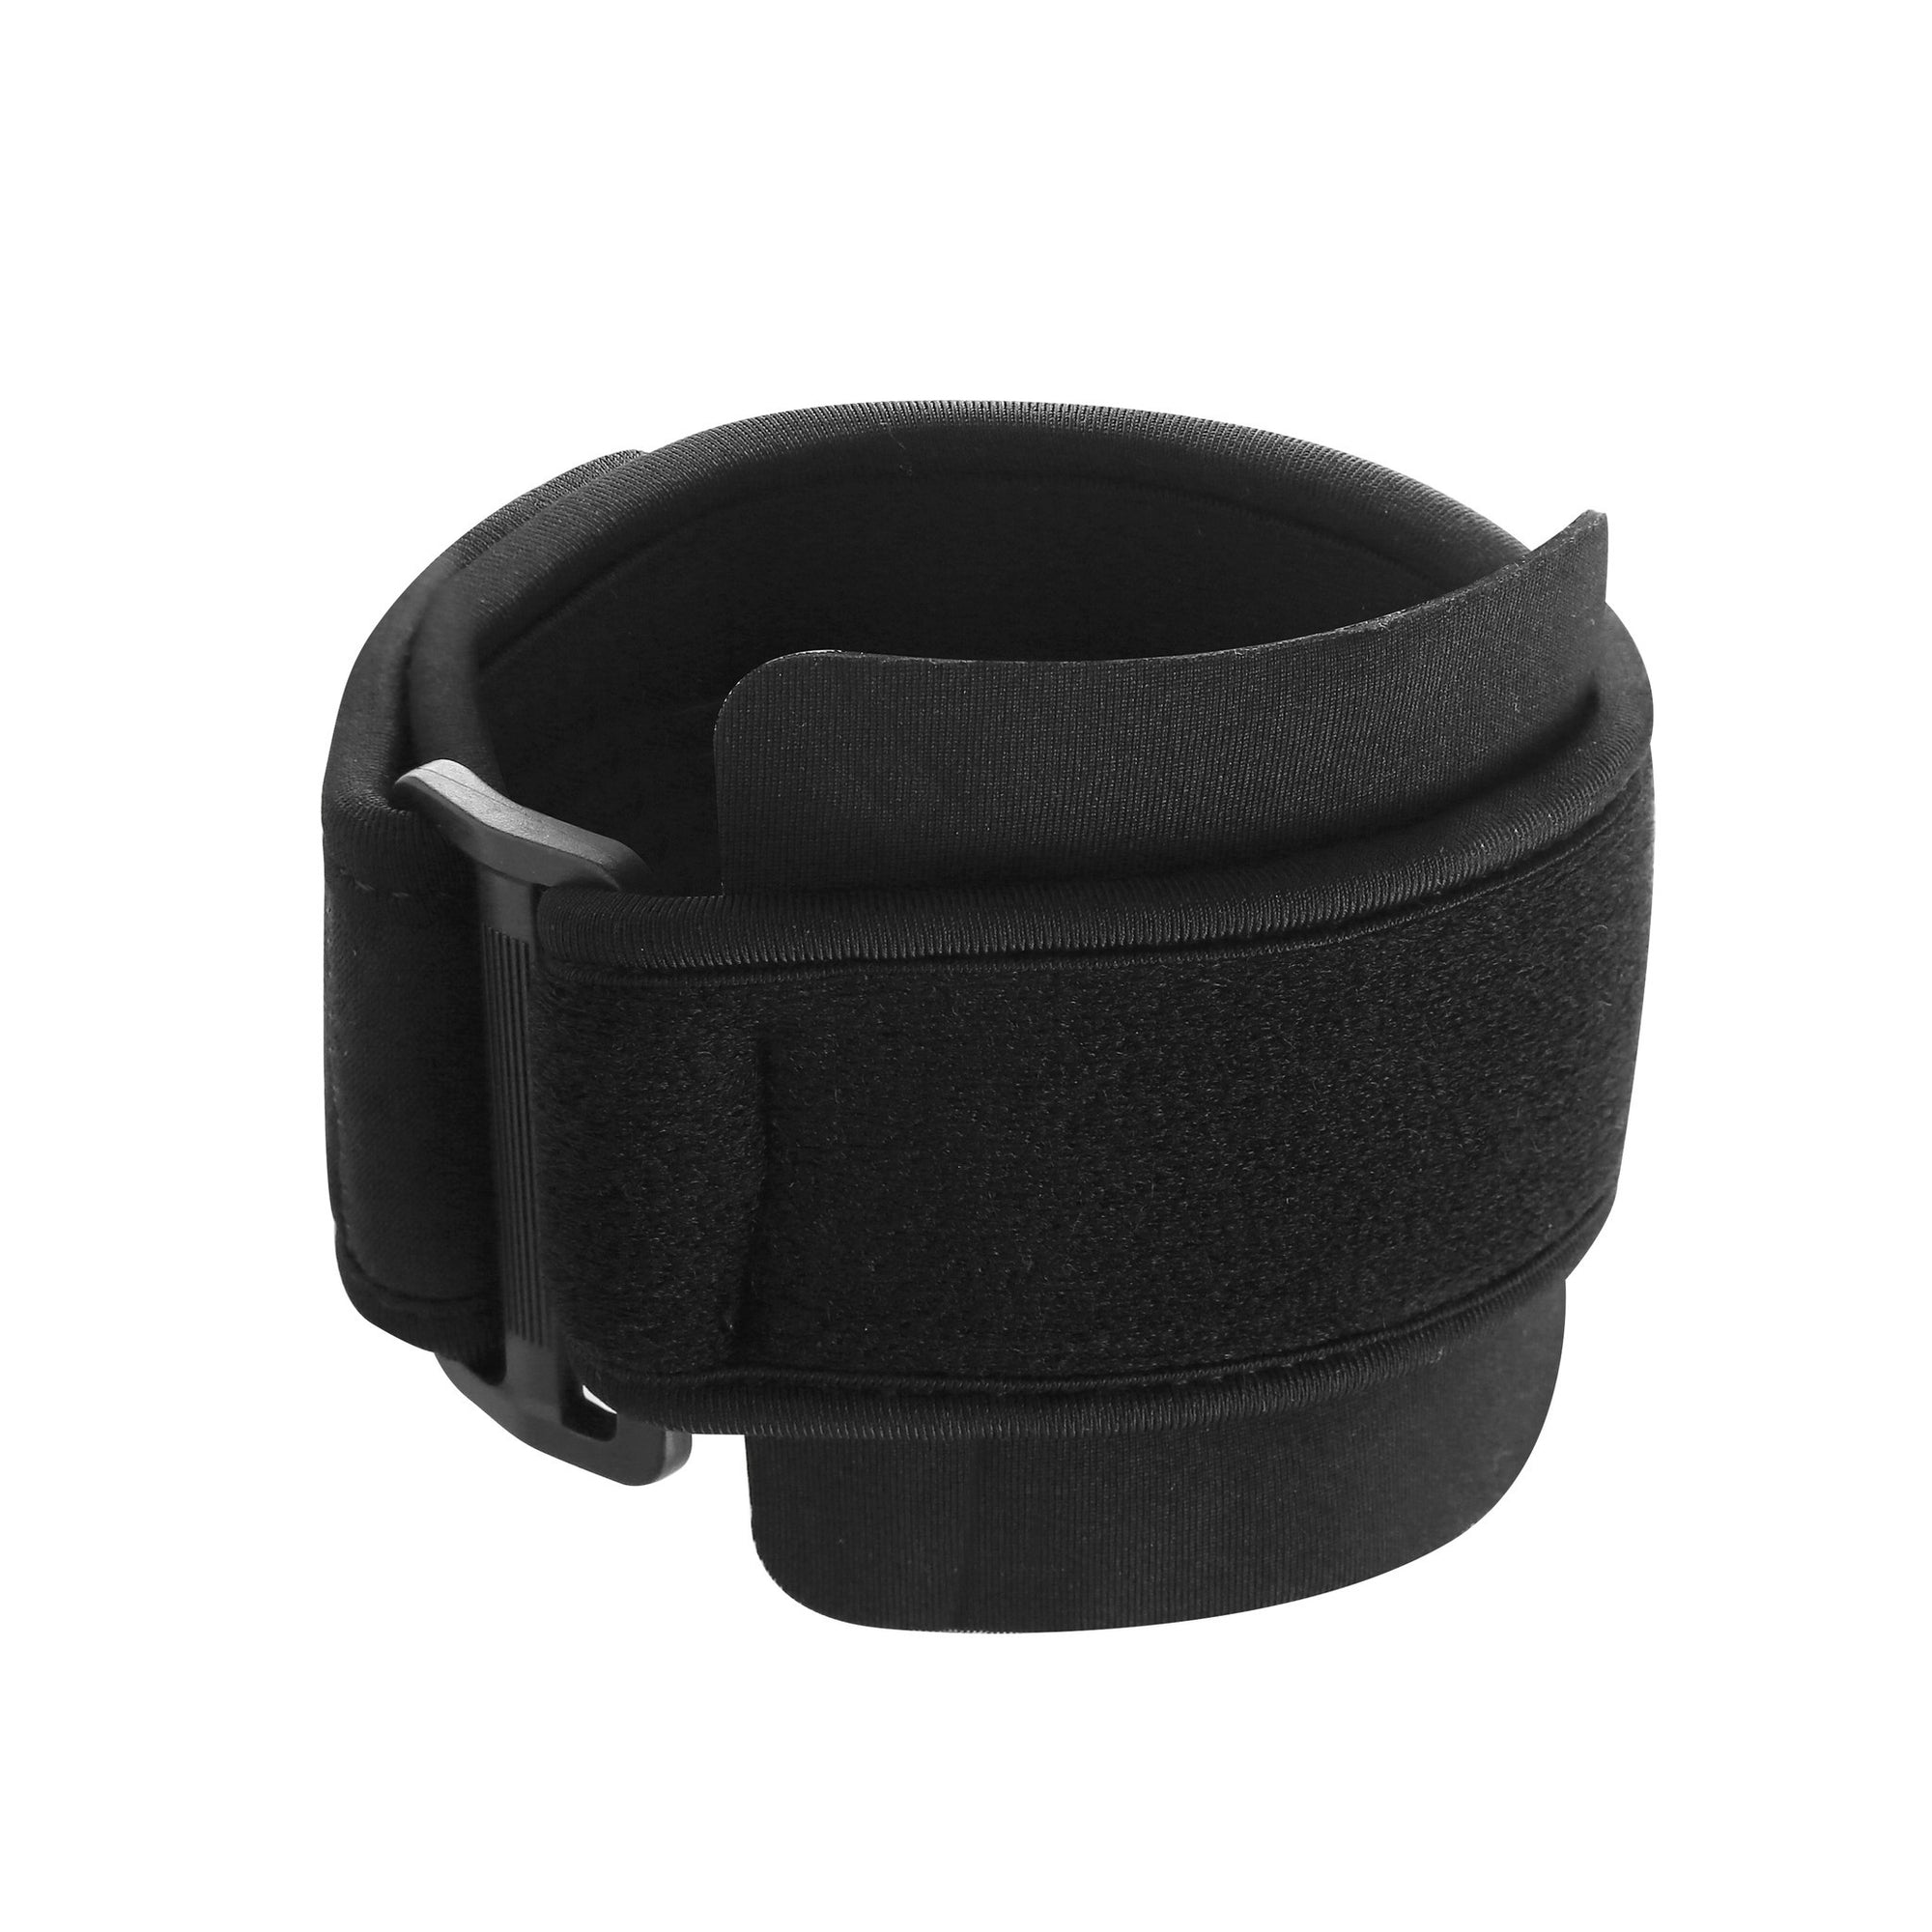 Extra Long Armband for use with Armband SwimCell.